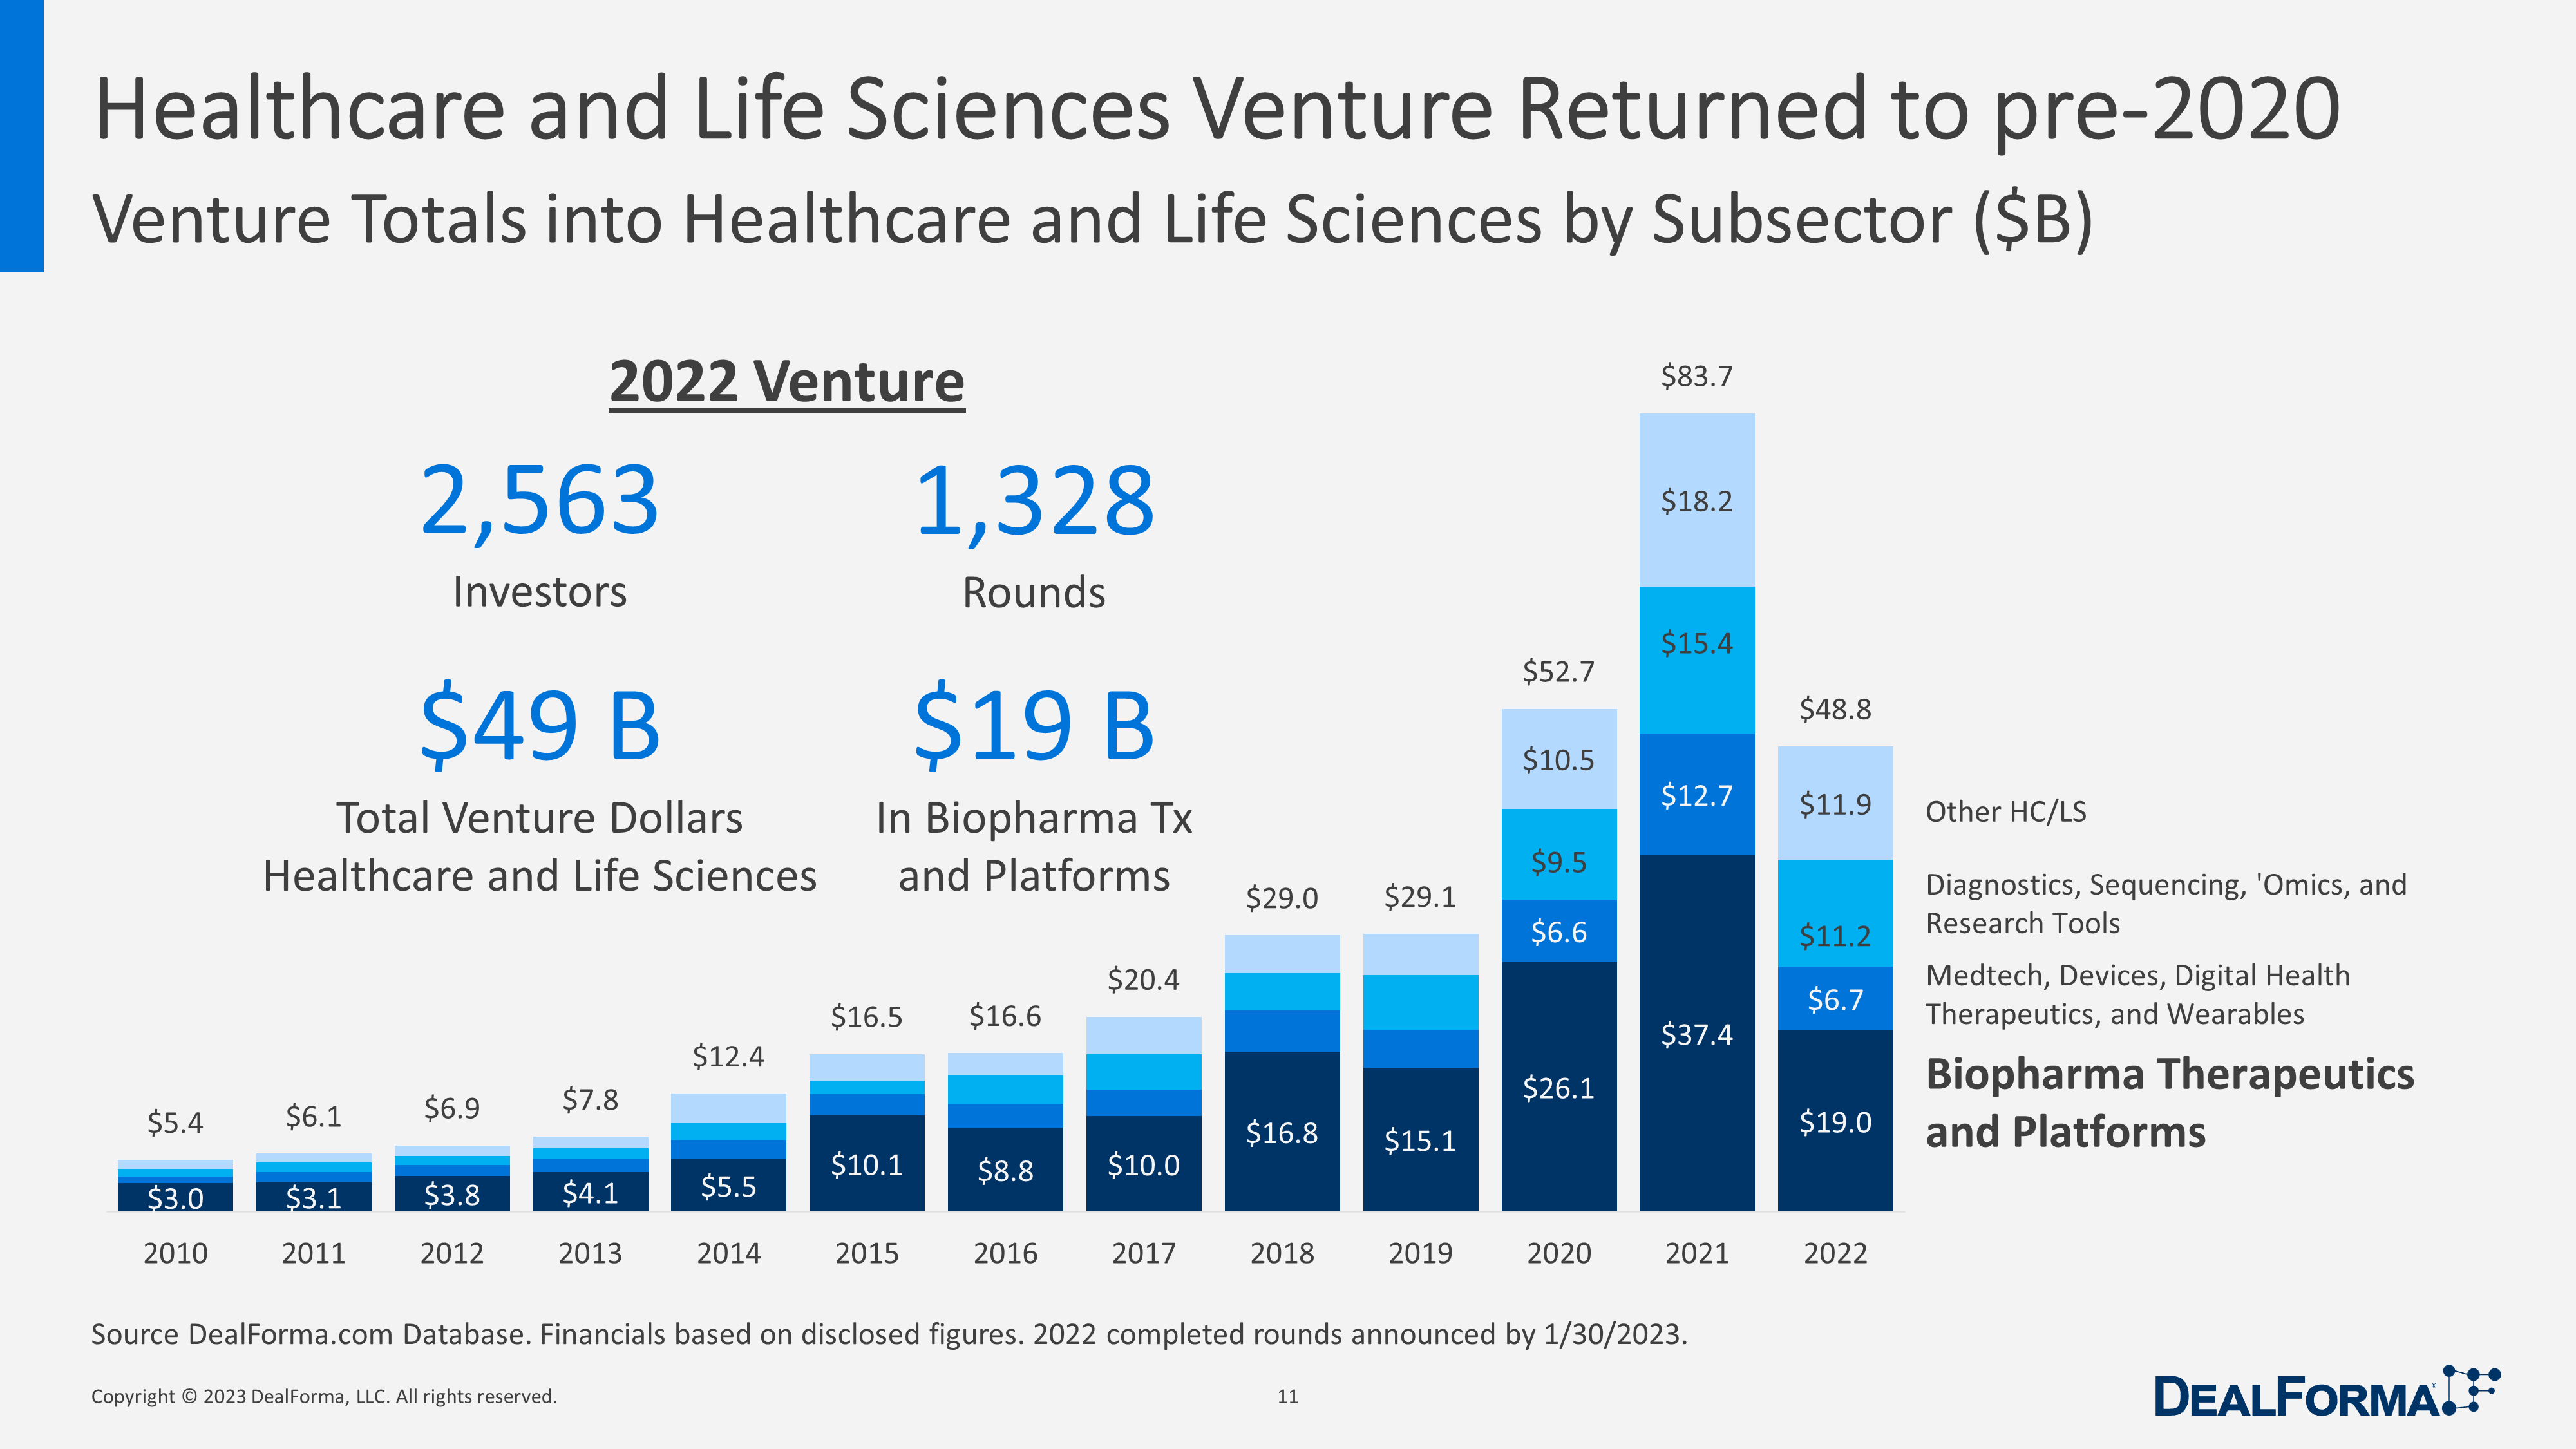 Healthcare and Life Sciences Venture Returned to pre-2020